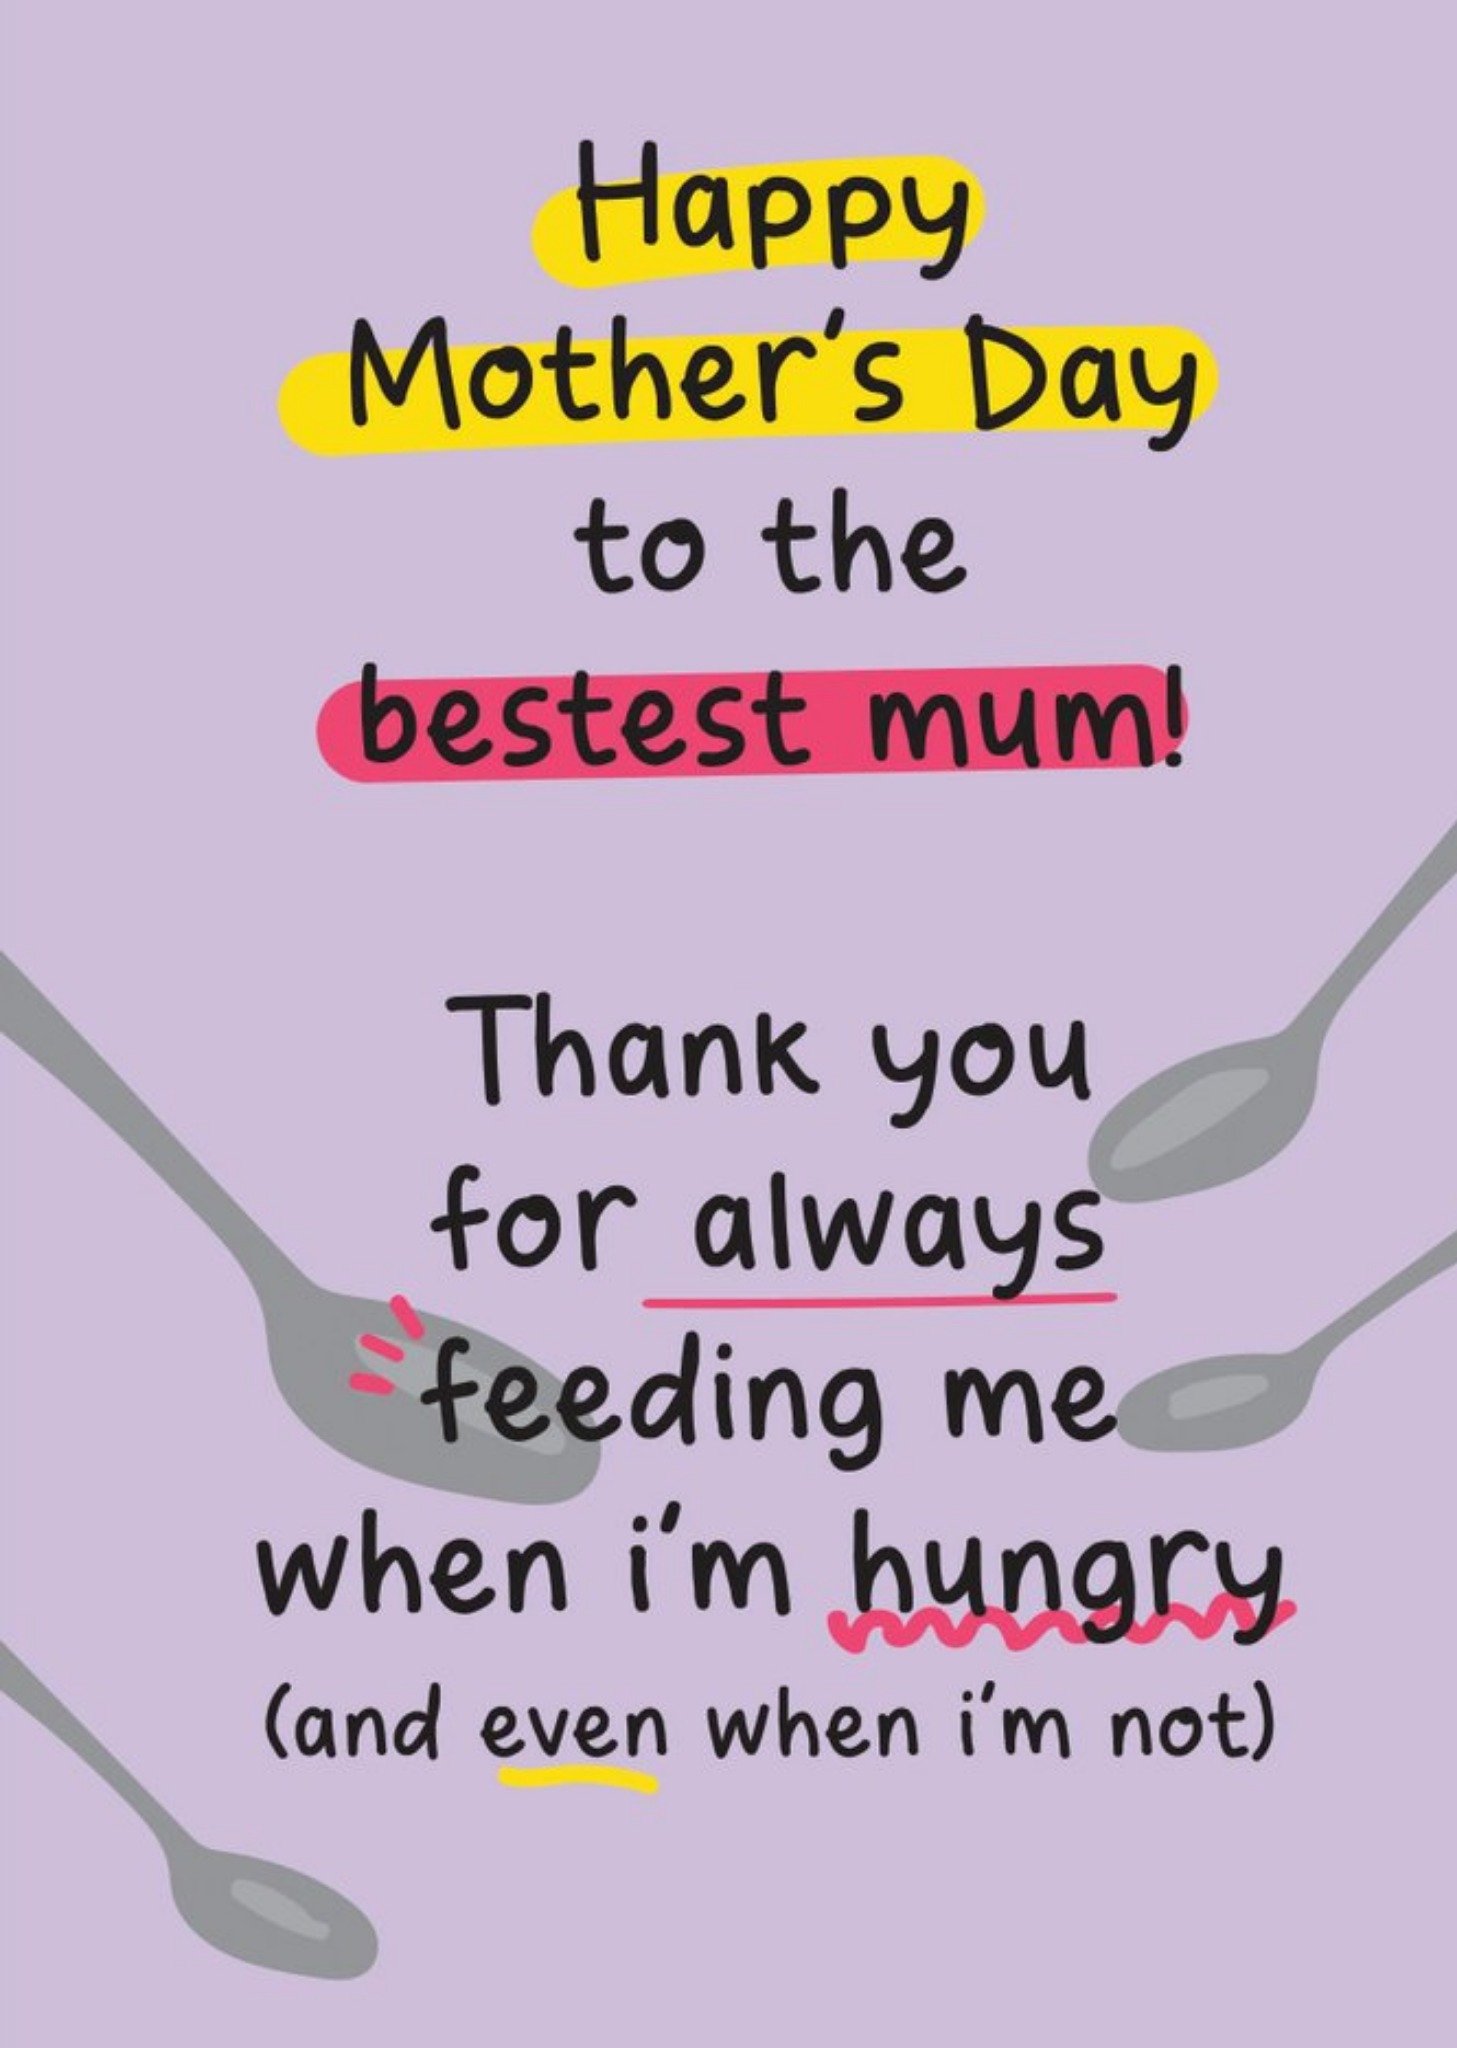 Moonpig Always Feeding Me When I'm Hungry Funny Mother's Day Card Ecard